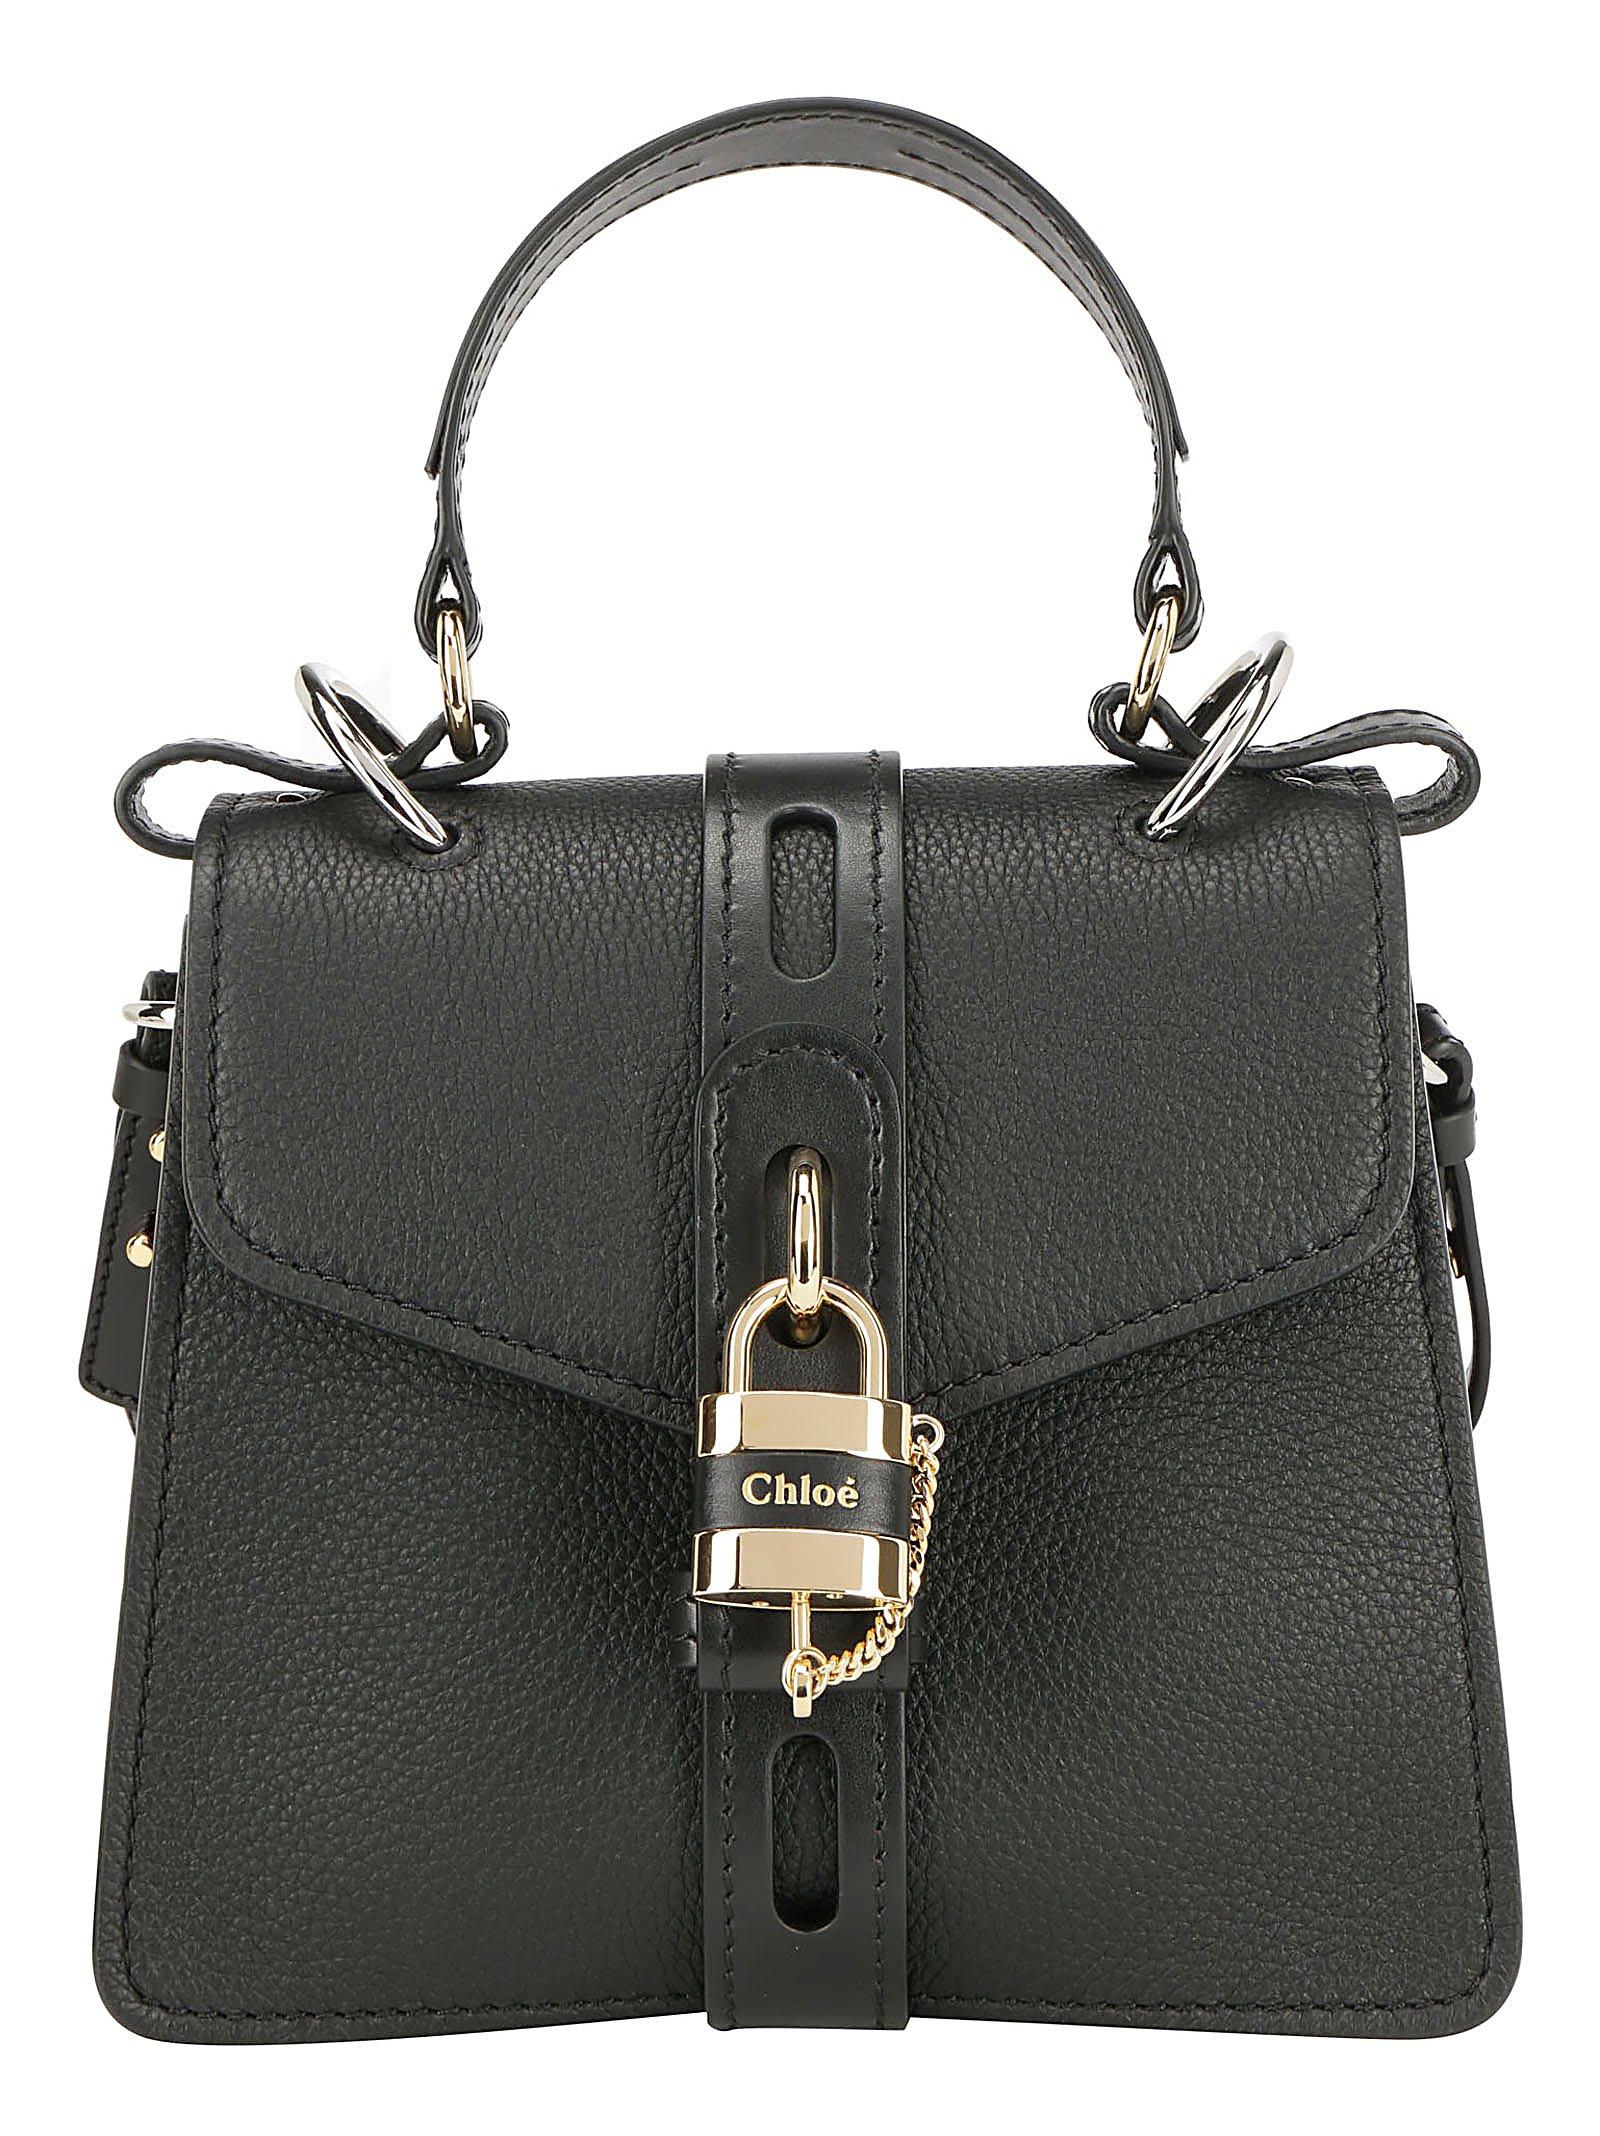 Chloé Leather Aby Logo Padlock Top Handle Tote Bag in Black - Lyst